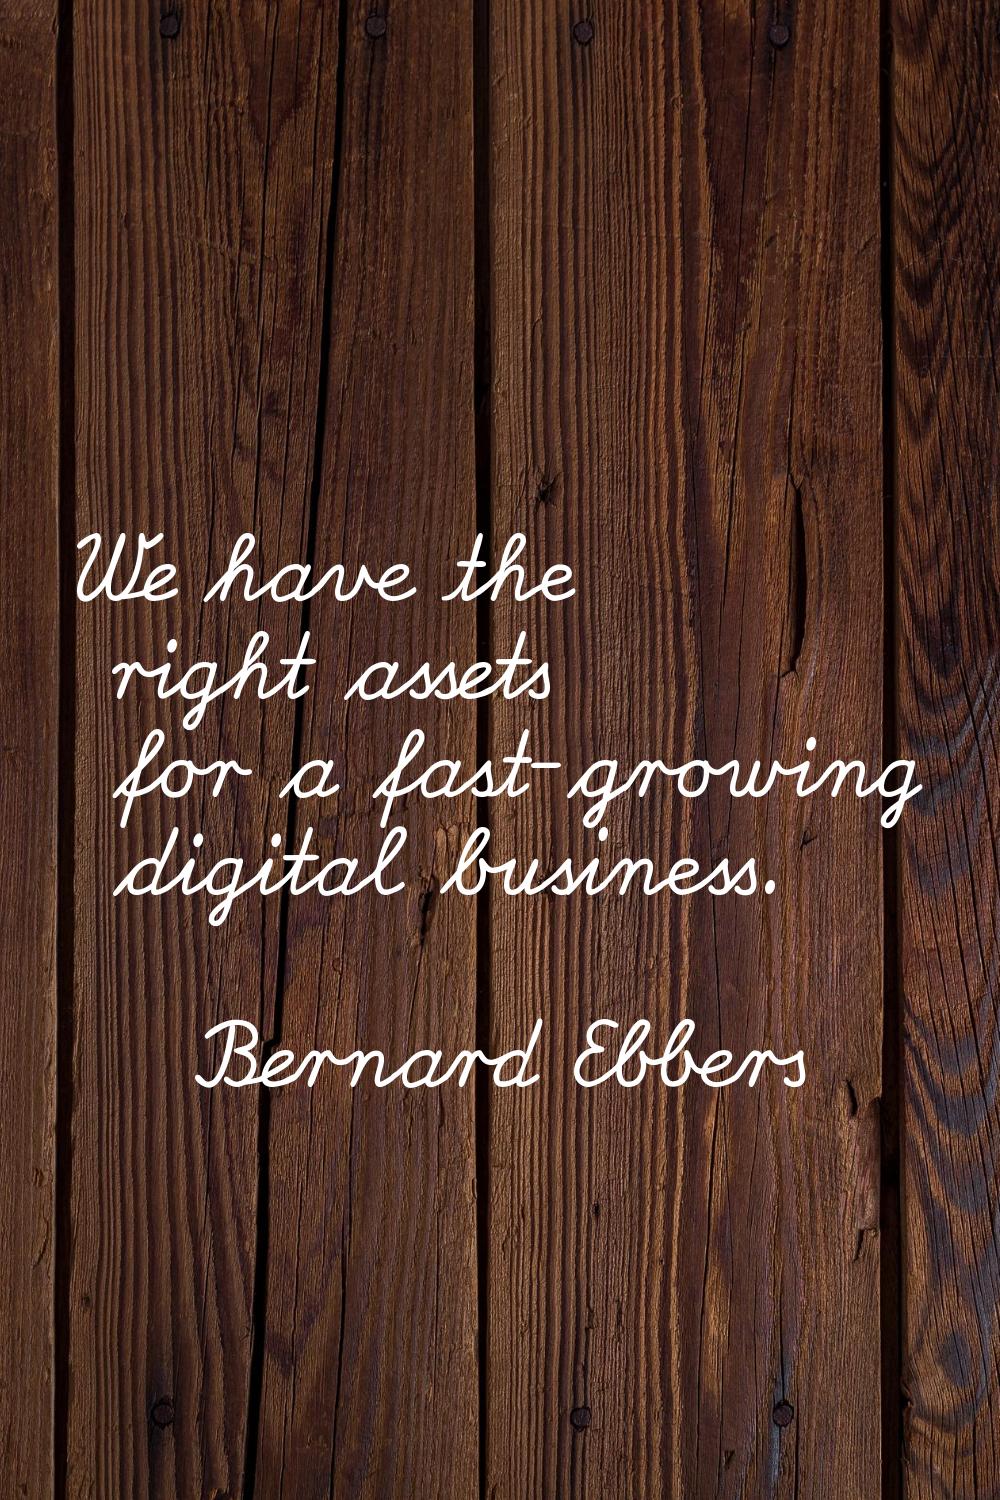 We have the right assets for a fast-growing digital business.